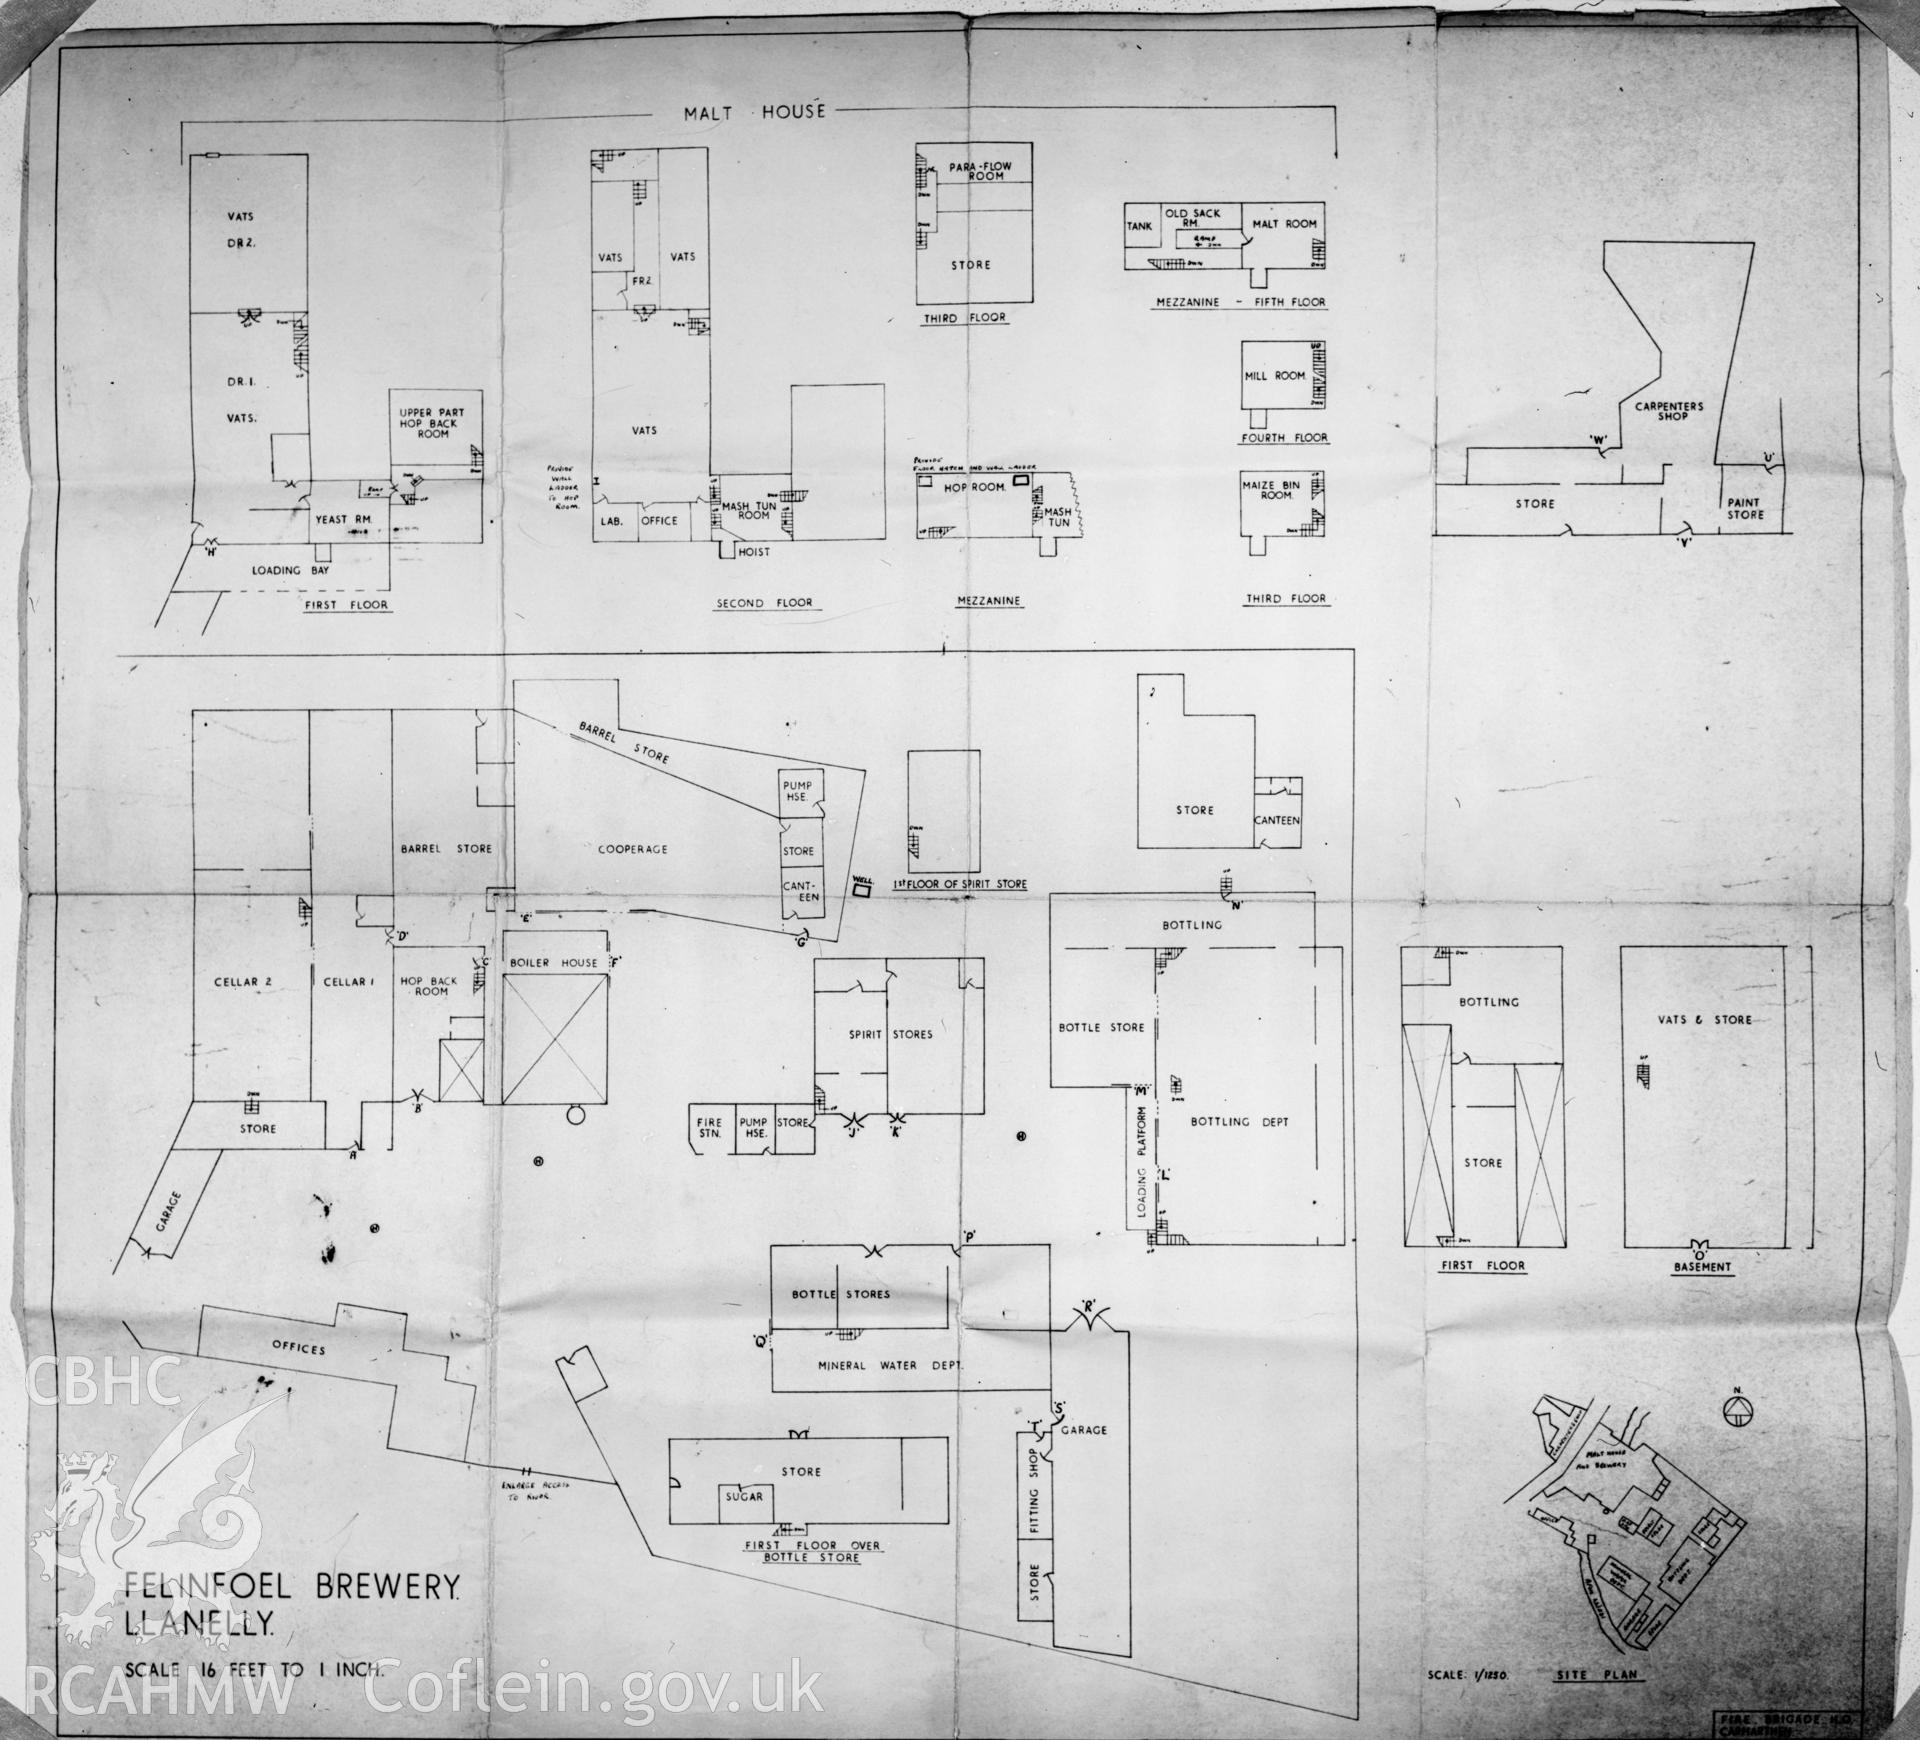 Black and white acetate negative showing measured drawings of Felinfoel Brewery, Llanelli.